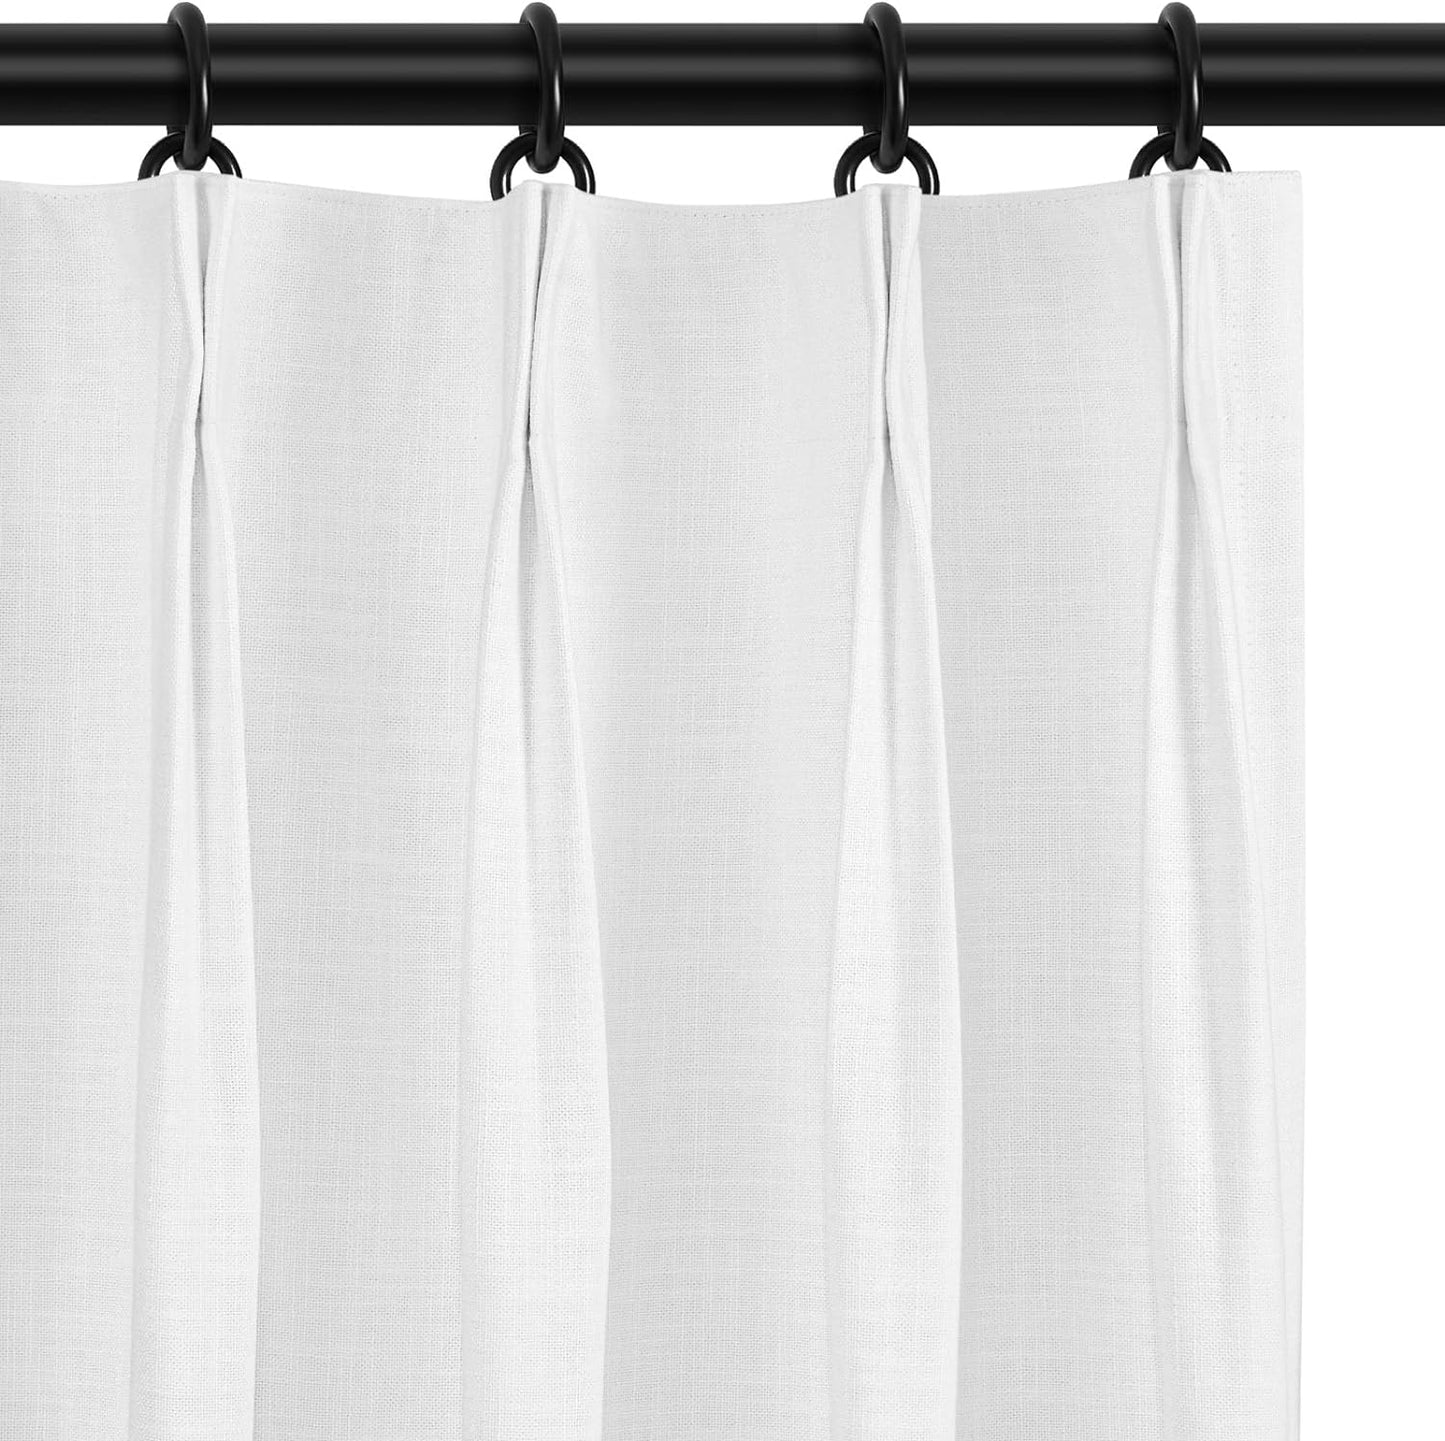 INOVADAY 100% Blackout Curtains for Bedroom, Pinch Pleated Linen Blackout Curtains 96 Inch Length 2 Panels Set, Thermal Room Darkening Linen Curtain Drapes for Living Room, W40 X L96,Beige White  INOVADAY White 40"W X 84"L-2 Panels 